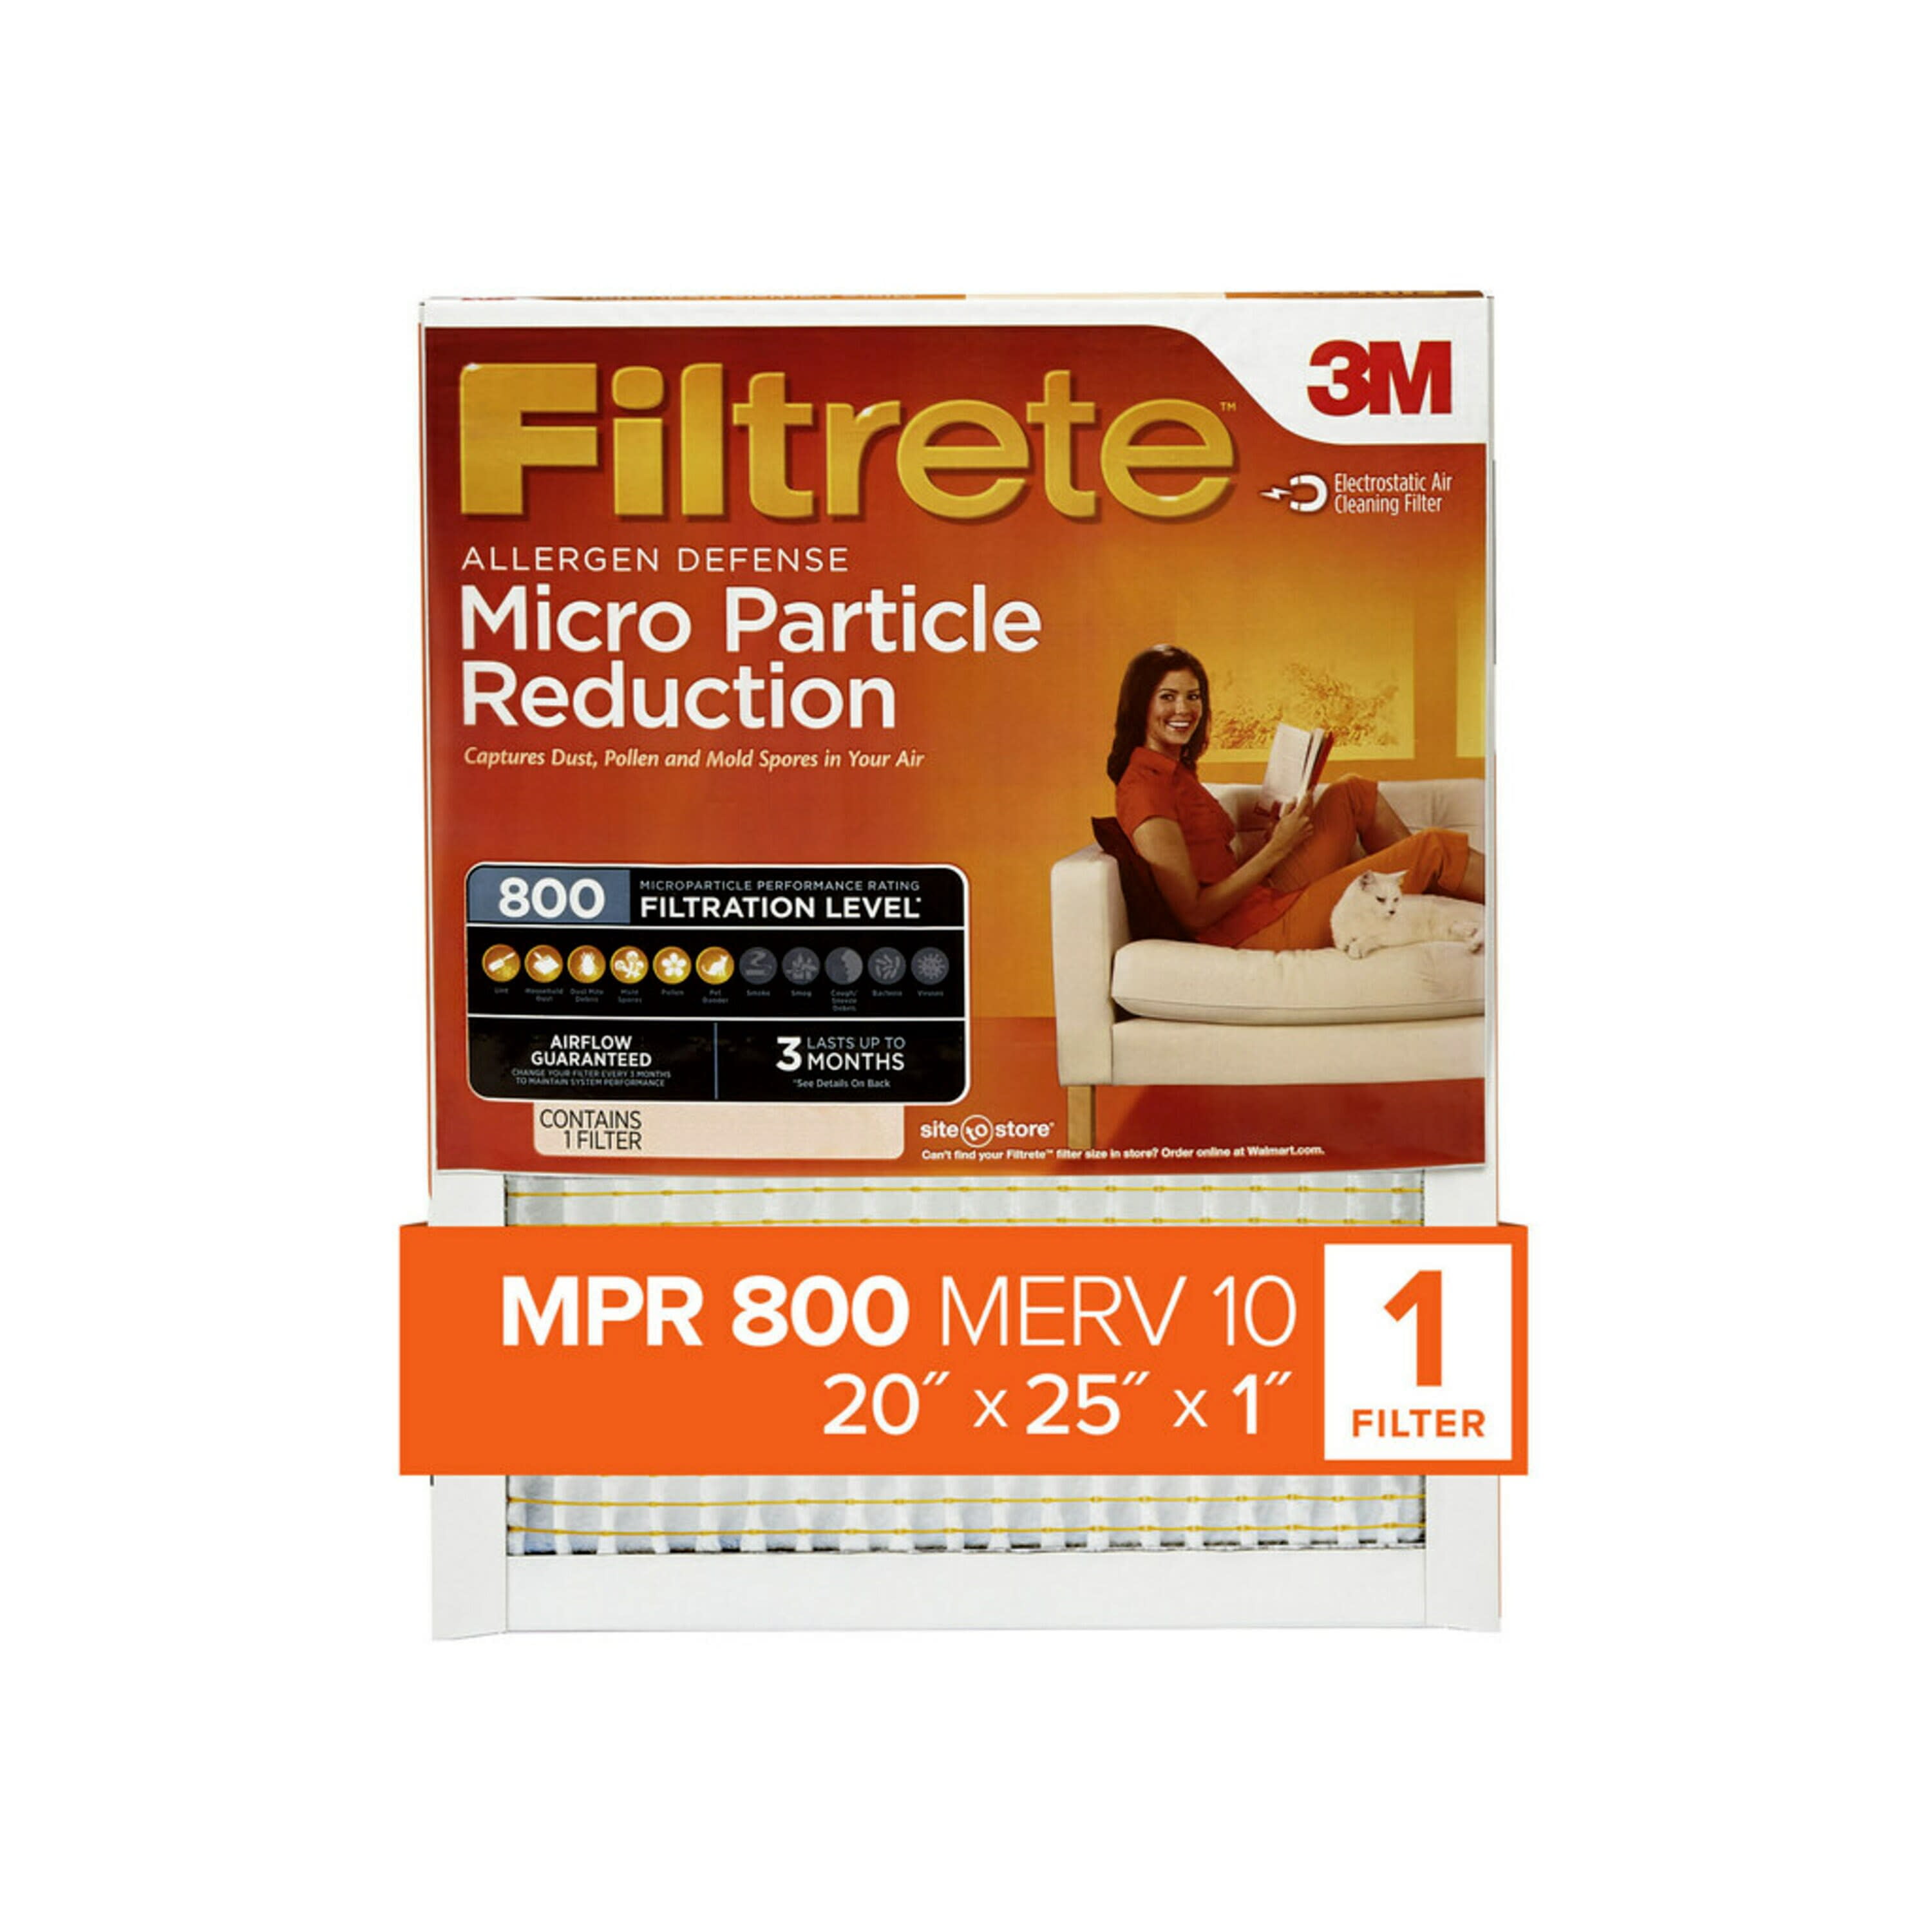 Filtrete by 3M, 20x25x1, MERV 10, Micro Particle Reduction HVAC Furnace Air Filter, Captures Pet Dander and Pollen, 800 MPR, 1 Filter